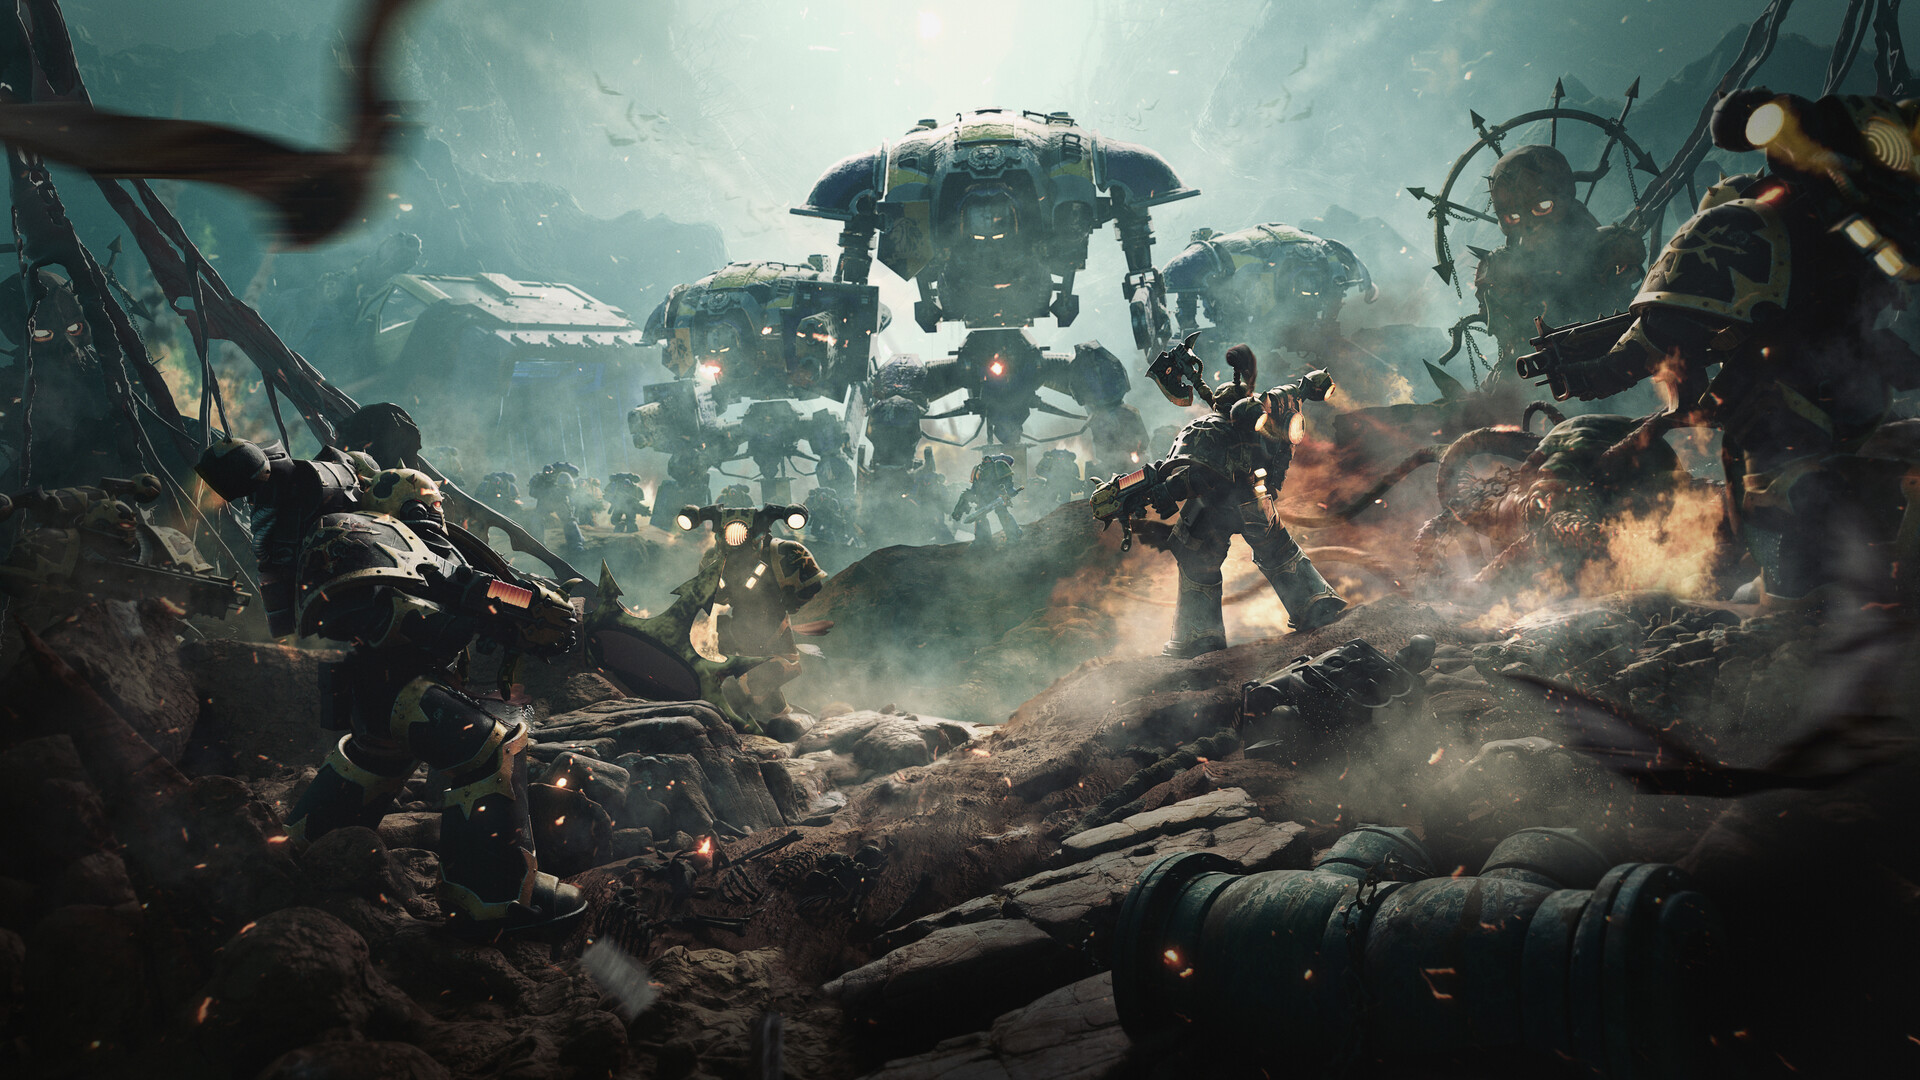 General 1920x1080 science fiction Warhammer 40,000 Warhammer space marines power armor bolter gun Imperial Knight Chaos Space Marines fire smoke black red yellow rubble ruins debris video games video game art video game characters